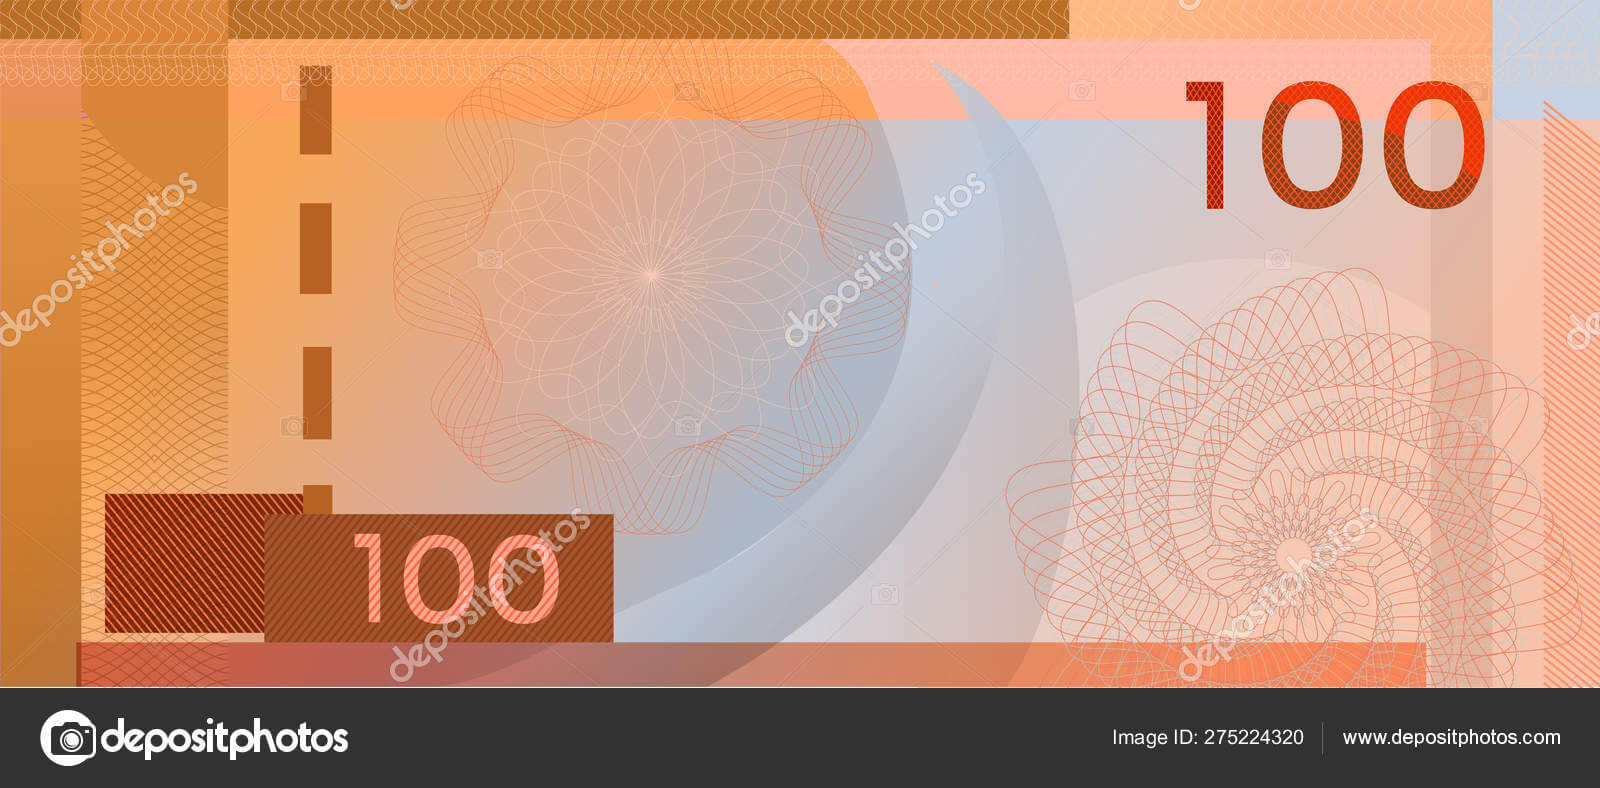 Voucher Template Banknote 100 With Guilloche Pattern Throughout Bank Note Template